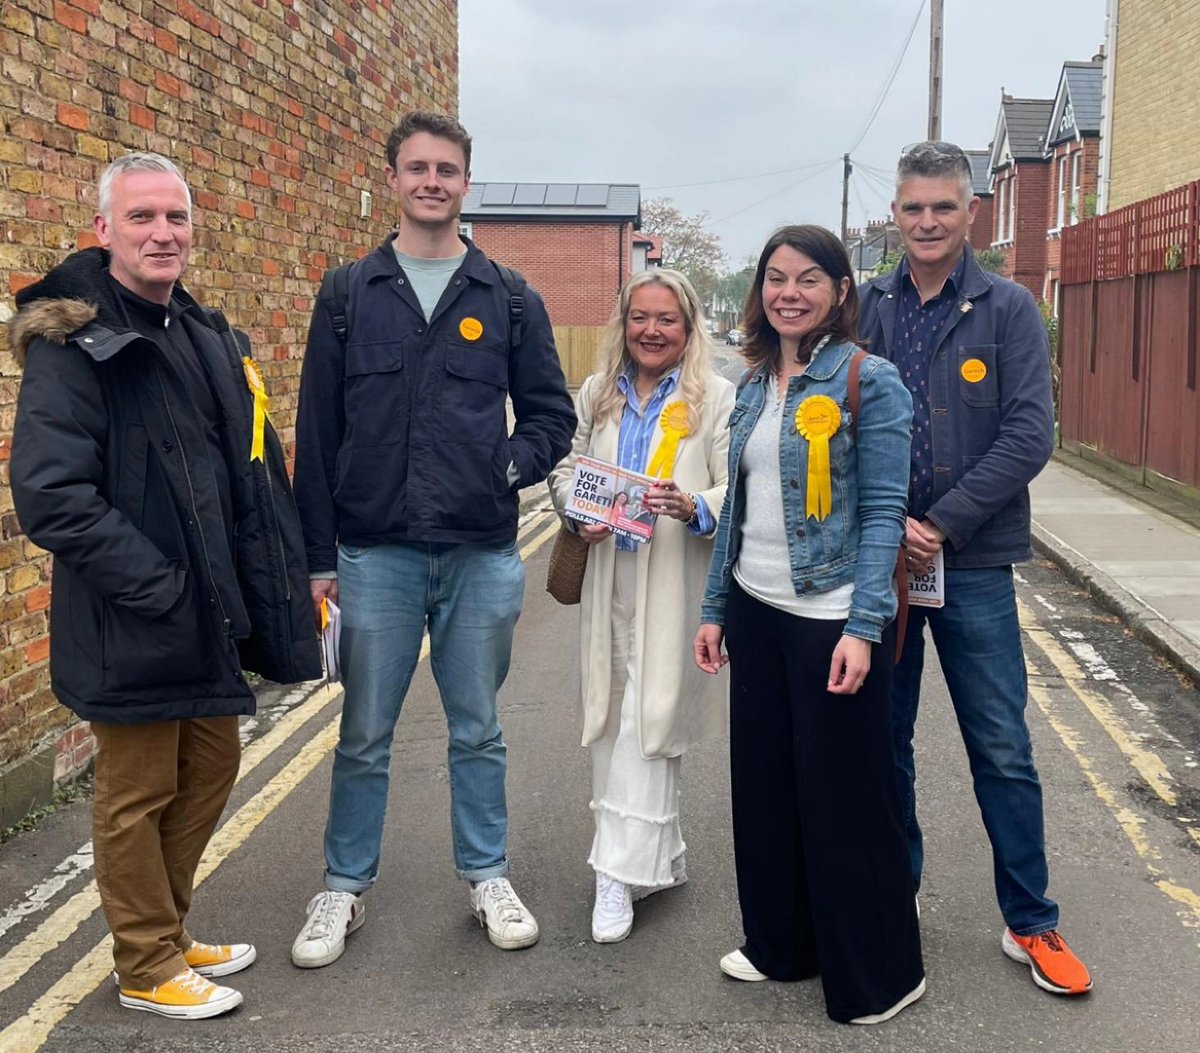 📣📣📣📣🗣POLLING DAY!!! Out in East Sheen getting a massively good reception for Gareth Roberts 🔶️ The amount of fed up former Tories has become an avalanche...our message 🔶️vote Gareth ❌ 🔶️ vote Rob Blackie ❌ 🔶️ vote Lib Dem ❌